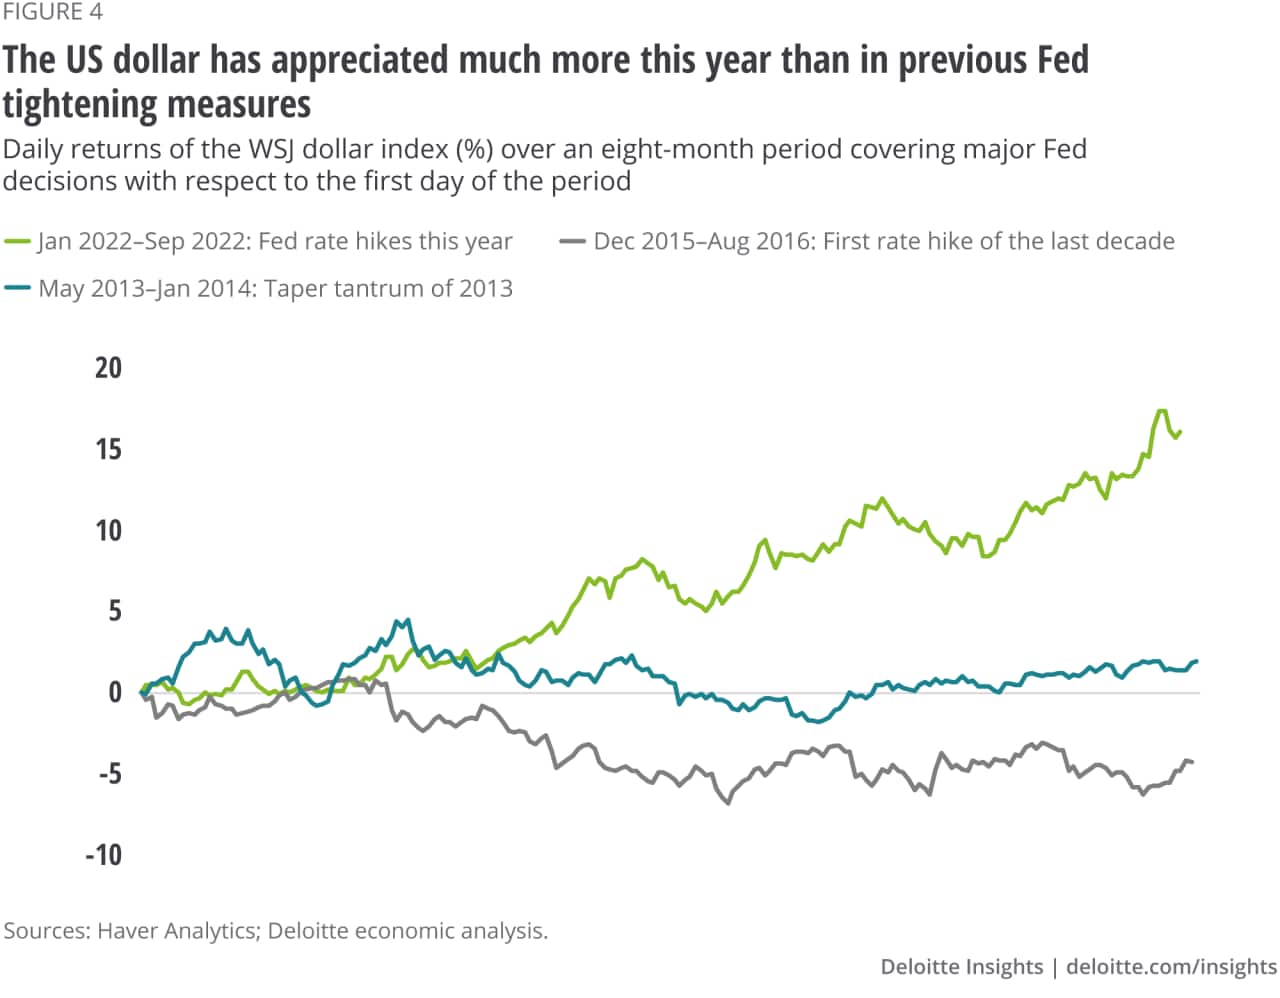 Figure 4. The US dollar has appreciated much more this year than in previous Fed tightening measures